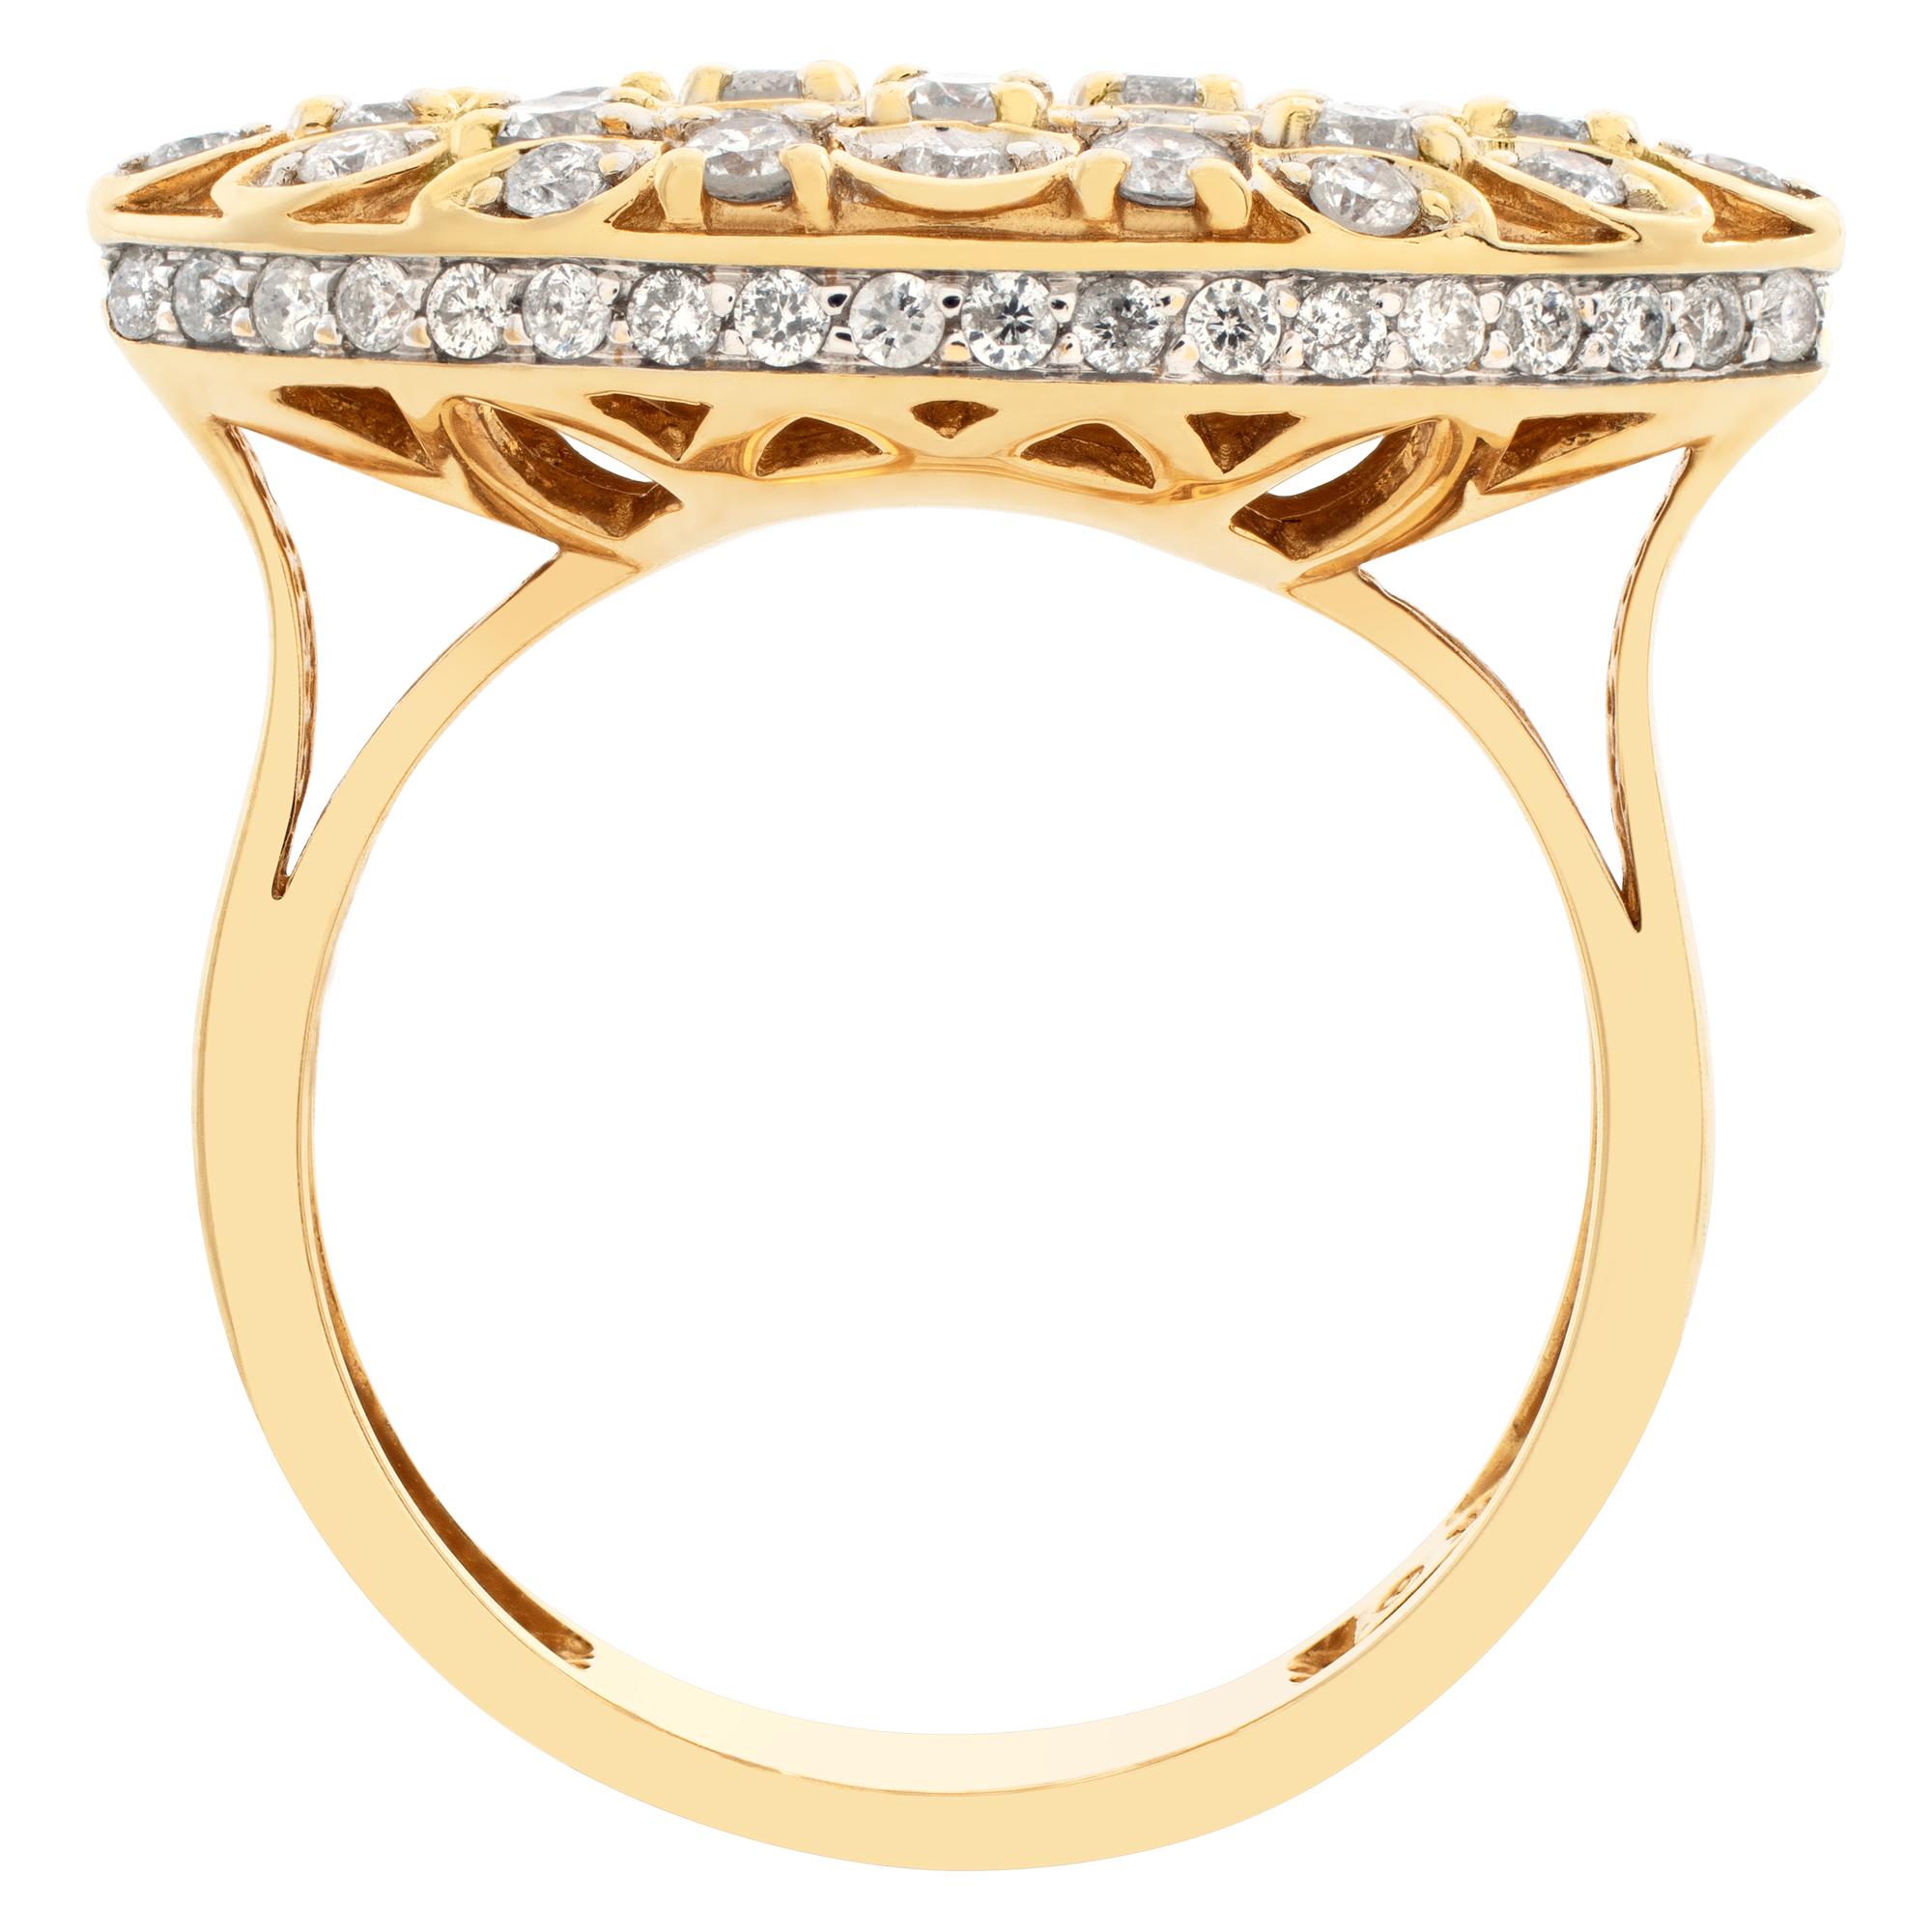 Oval Diamond Ring in 14k Yellow Gold, 0.93 Carats in Pave Set Diamonds For Sale 1